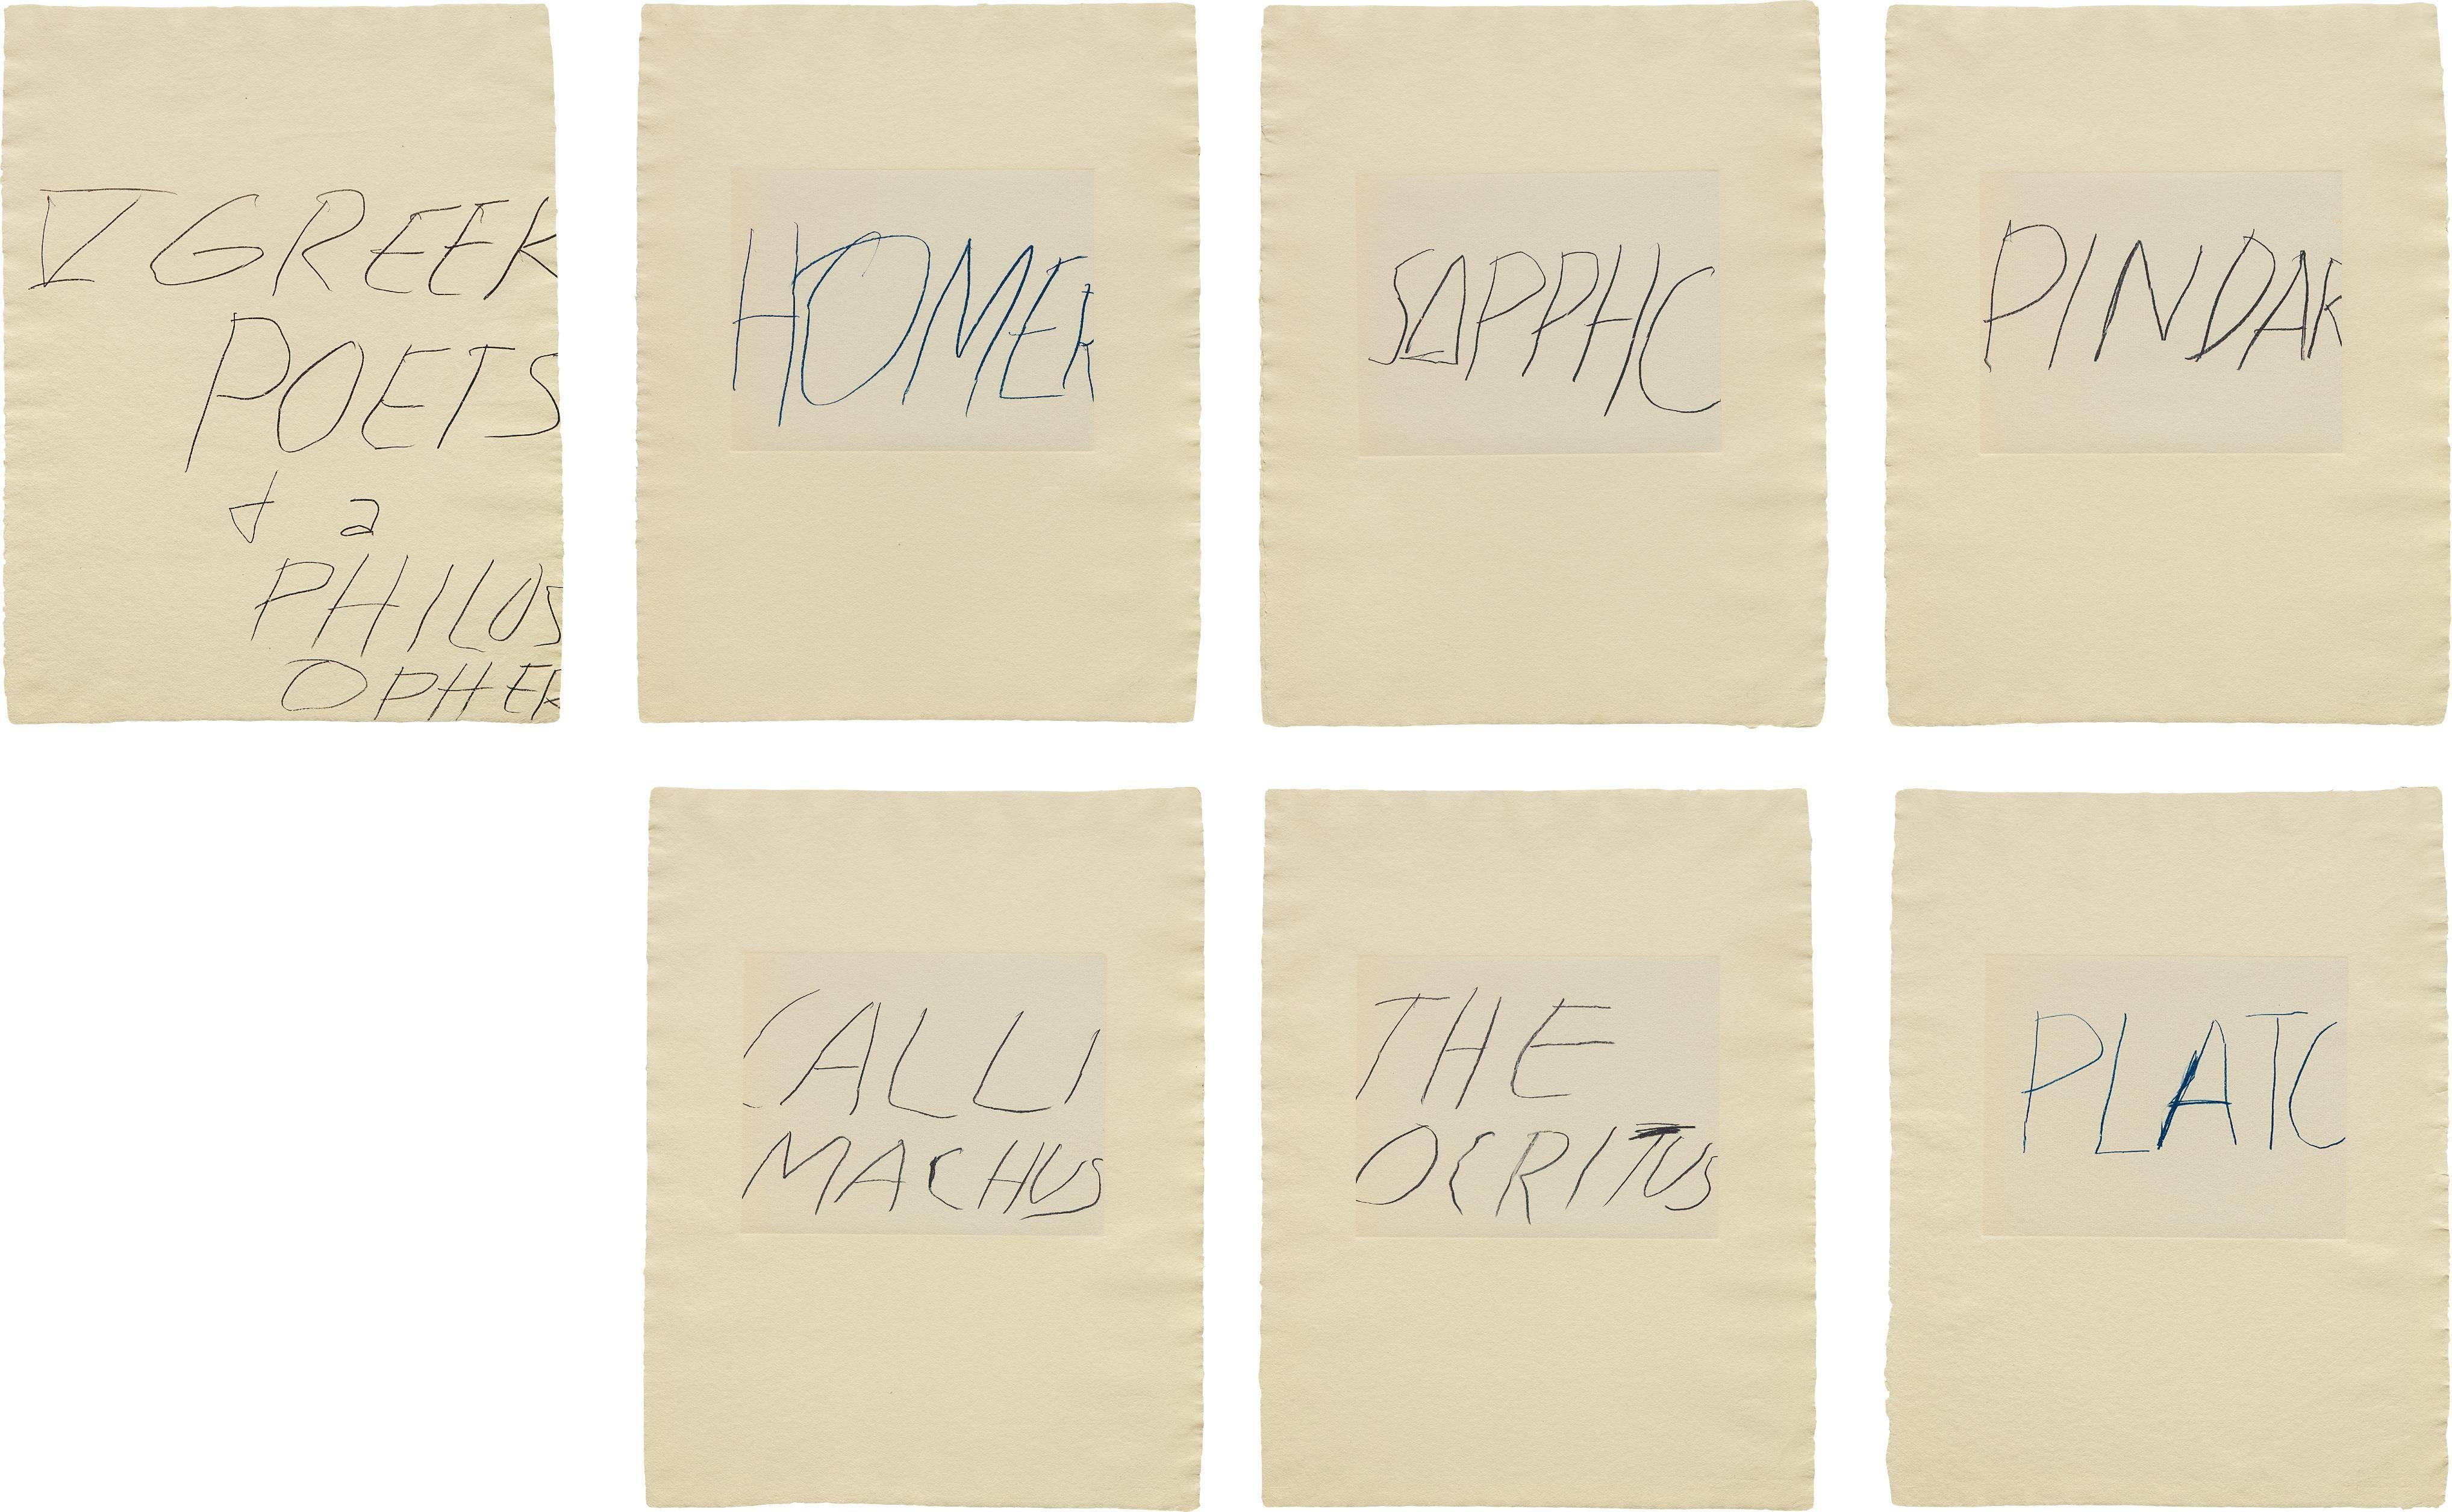 Five Greek Poets and a Philosopher - Print by Cy Twombly